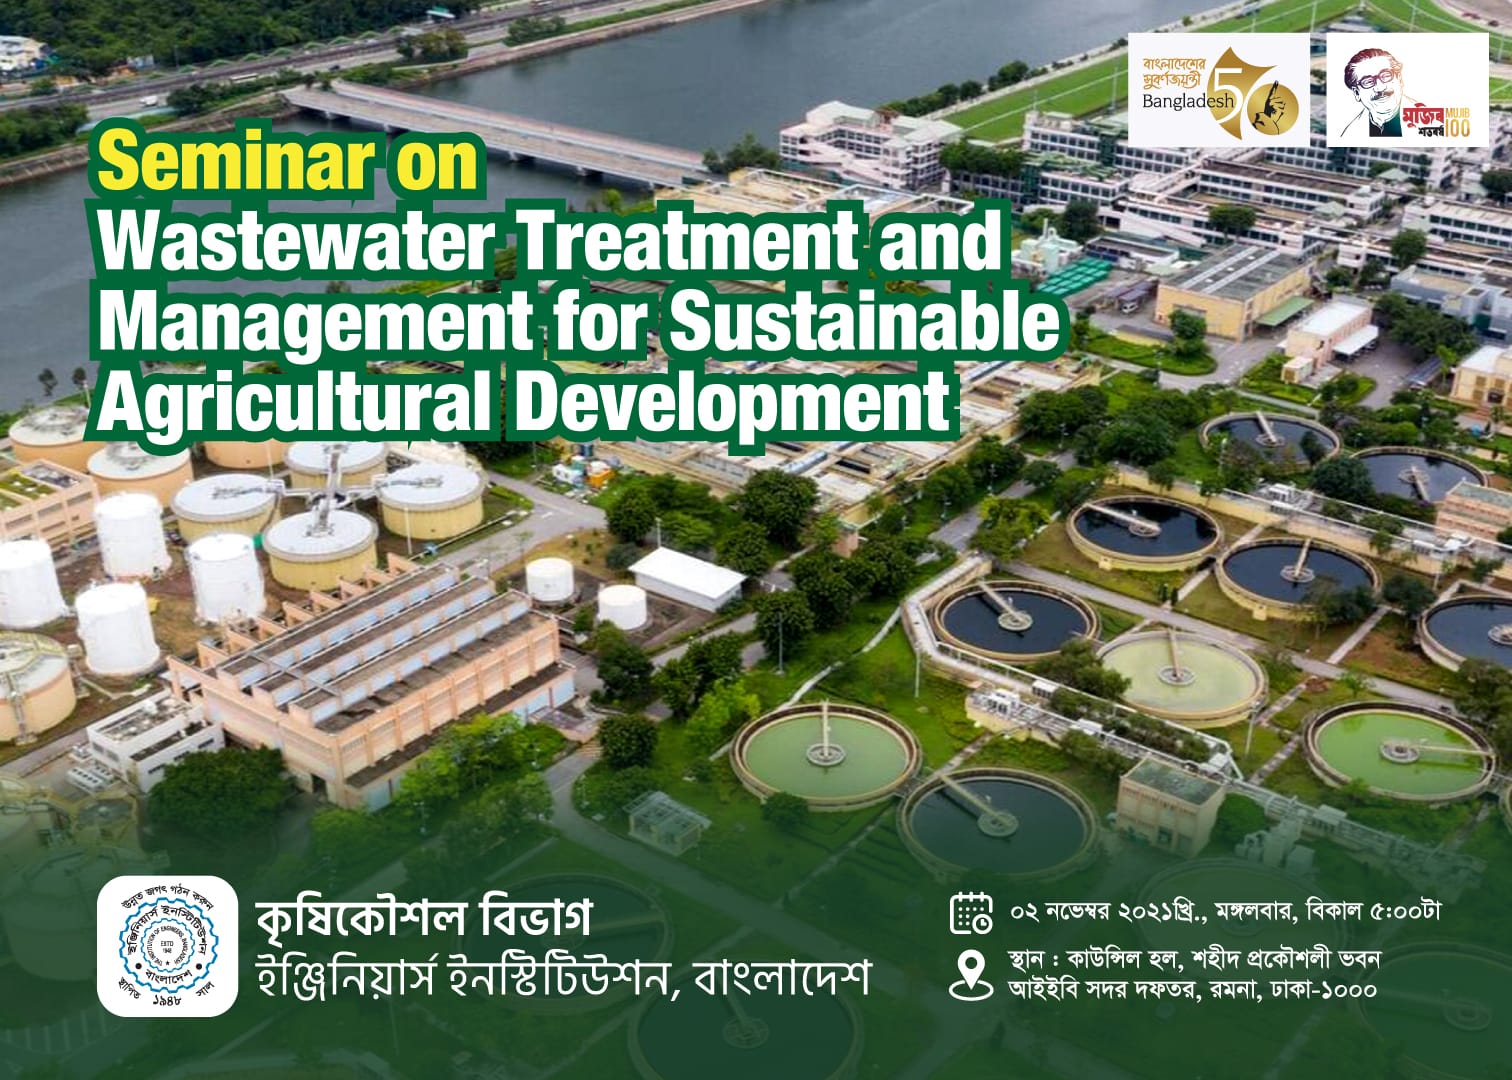 Seminar on Wastewater Treatment and Management for Sustainable Agricultural Development